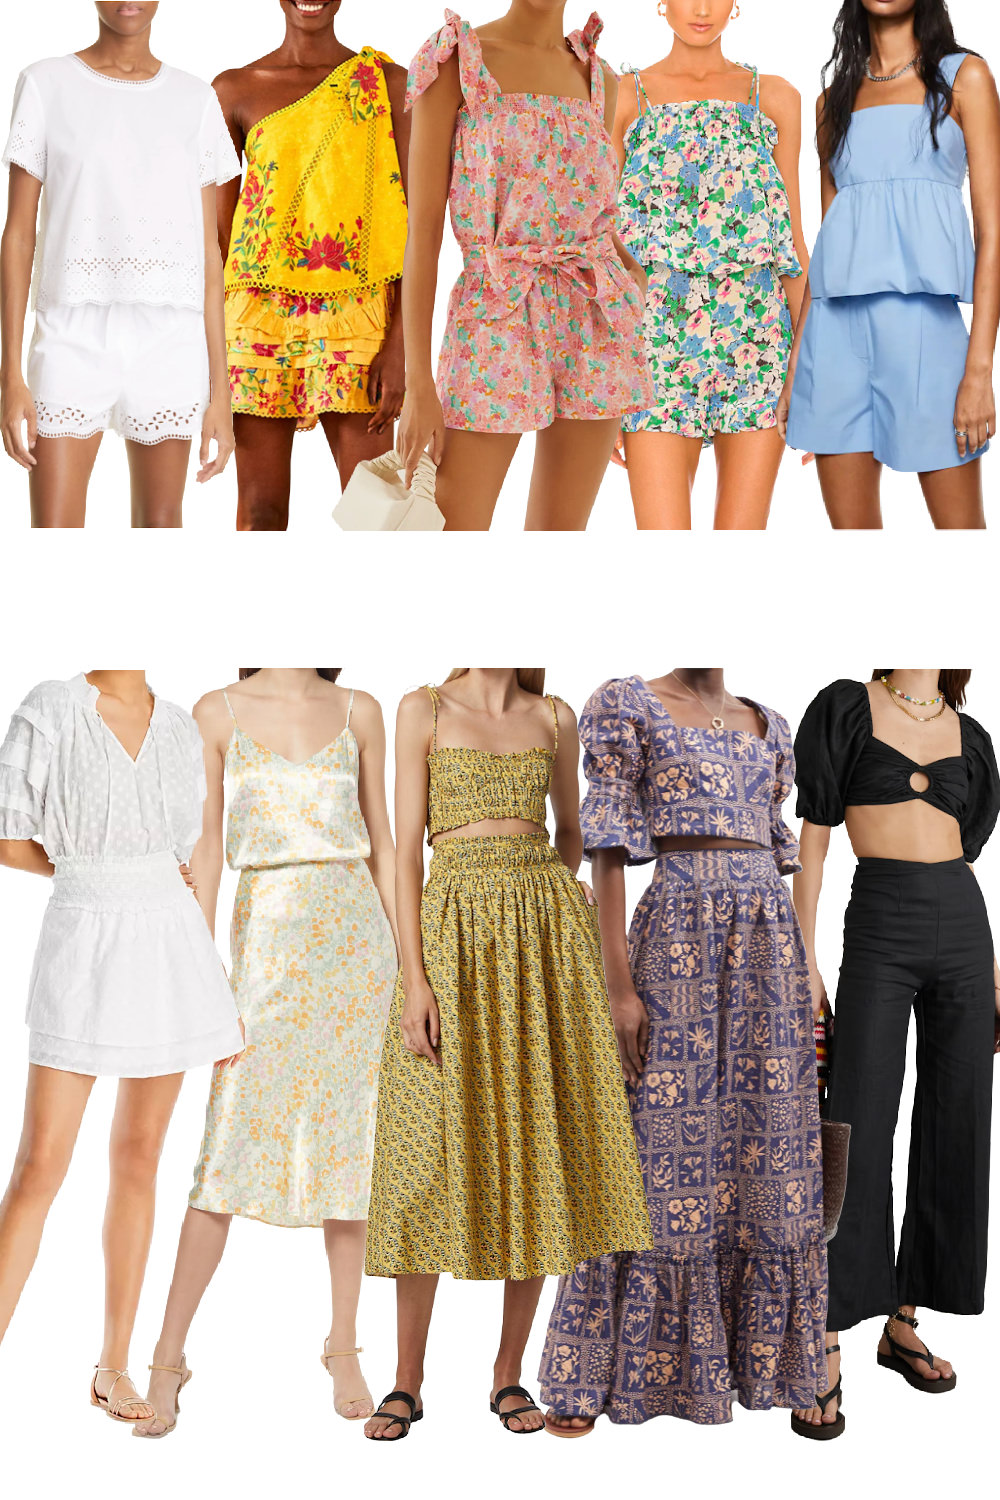 10 Cute Matching Sets for Summer